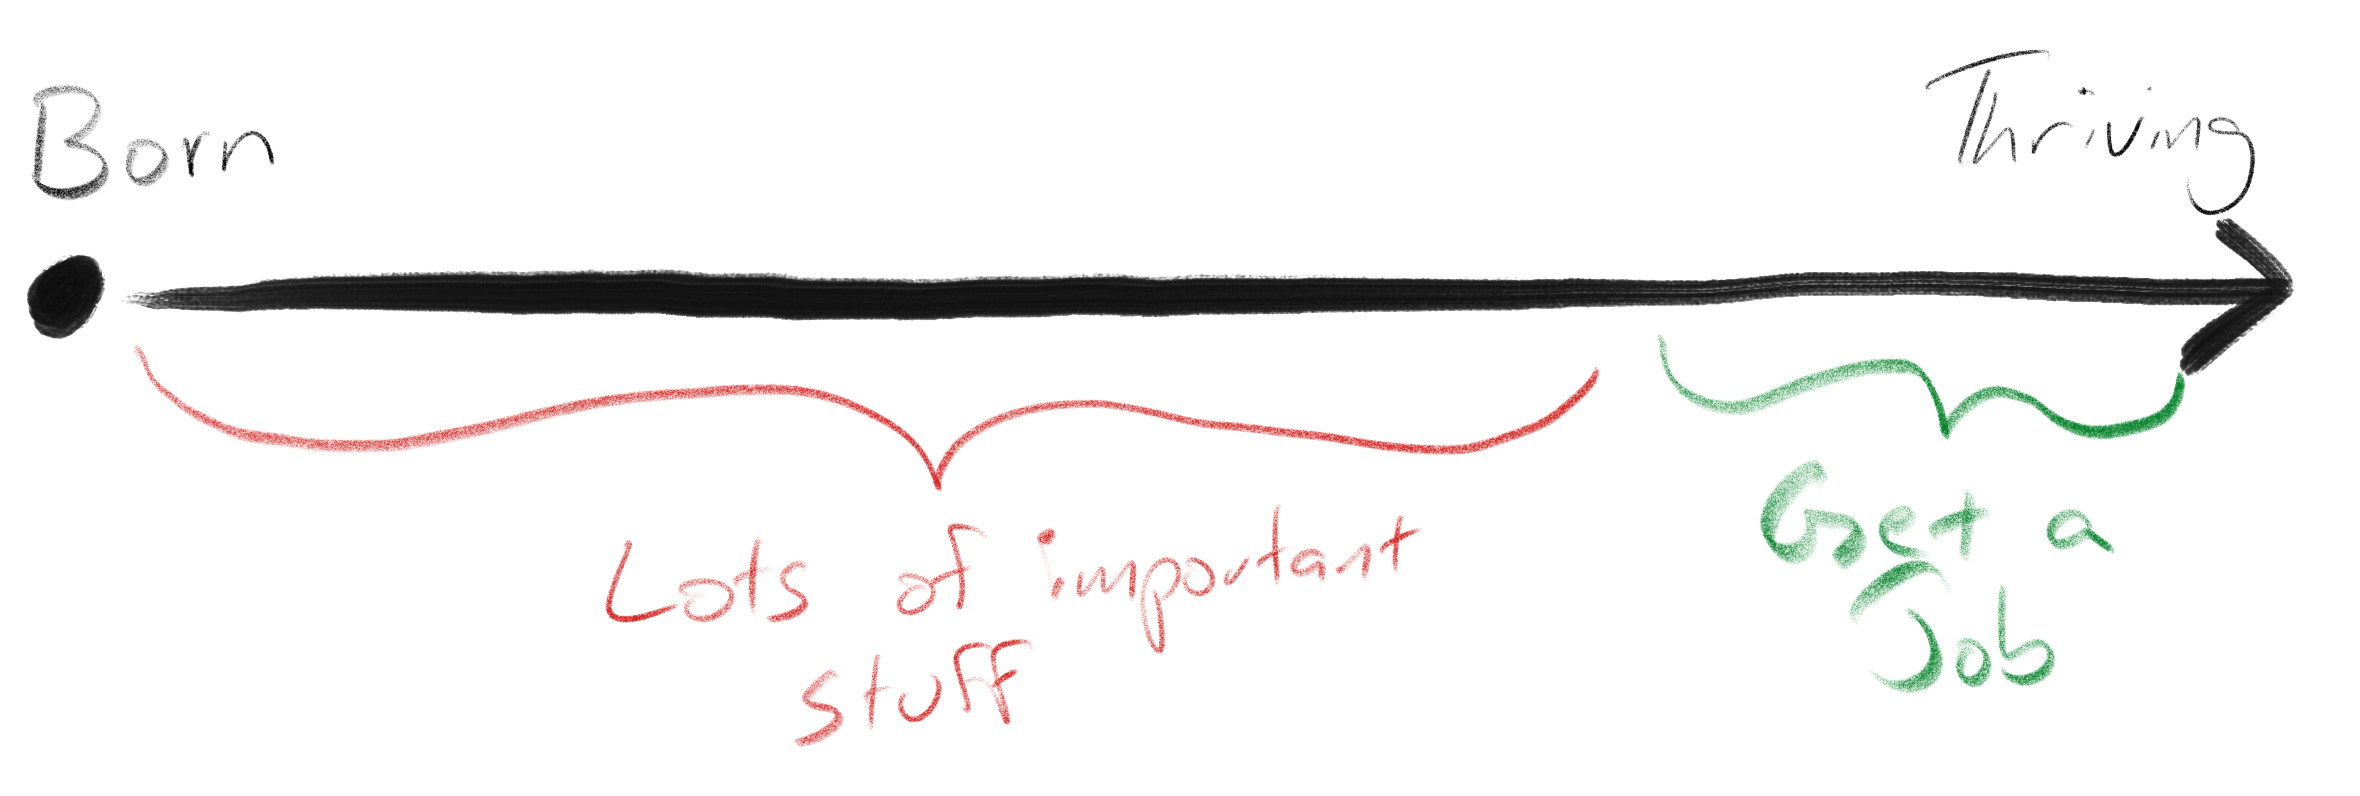 linechart showing continuum of a persons life with the first 90% labelled “lots of important stuff” and the last little bit marked as “get a job”